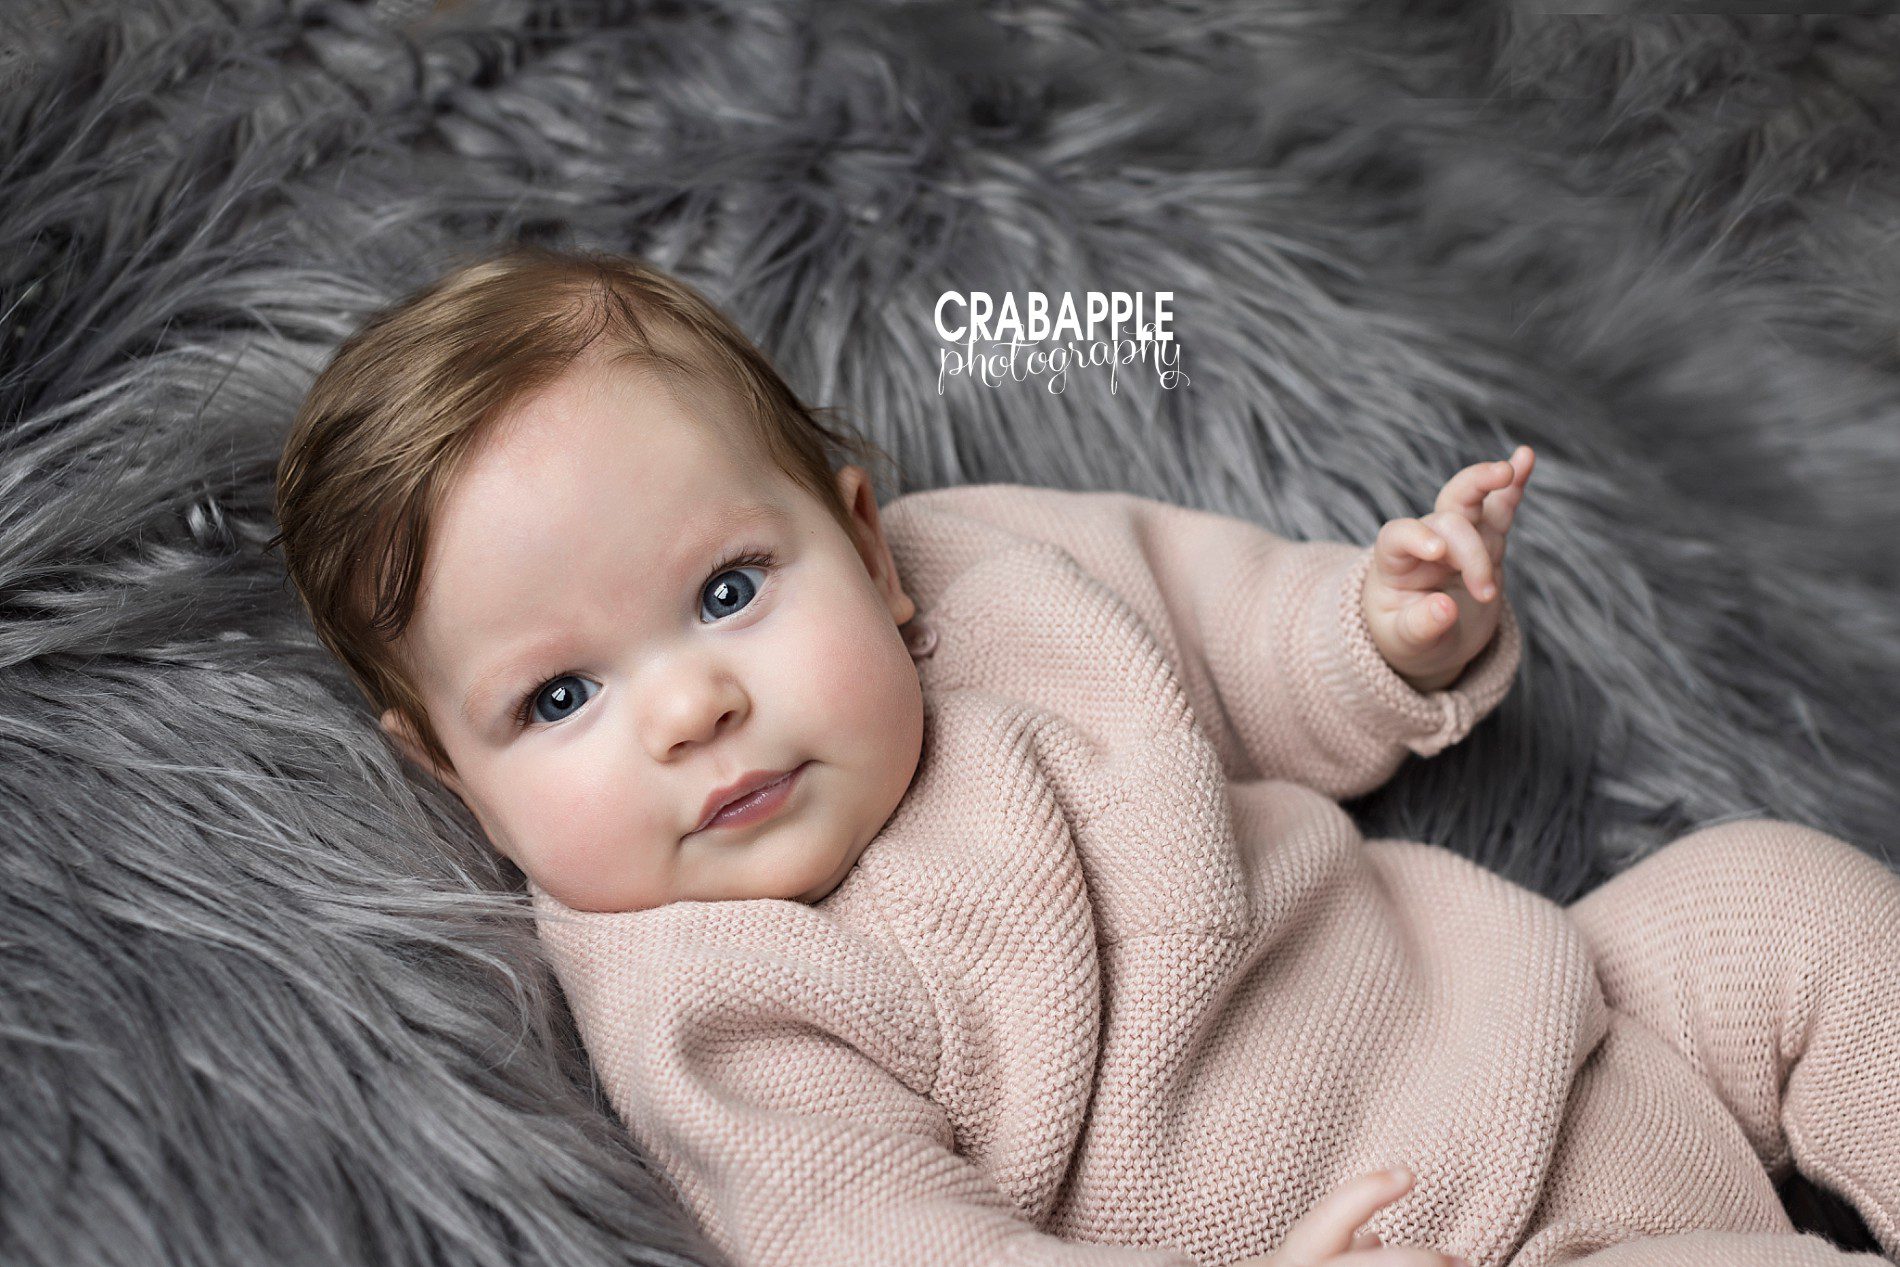 Baby portraits 6 month old baby girl in a light pink outfit on a gray fur.